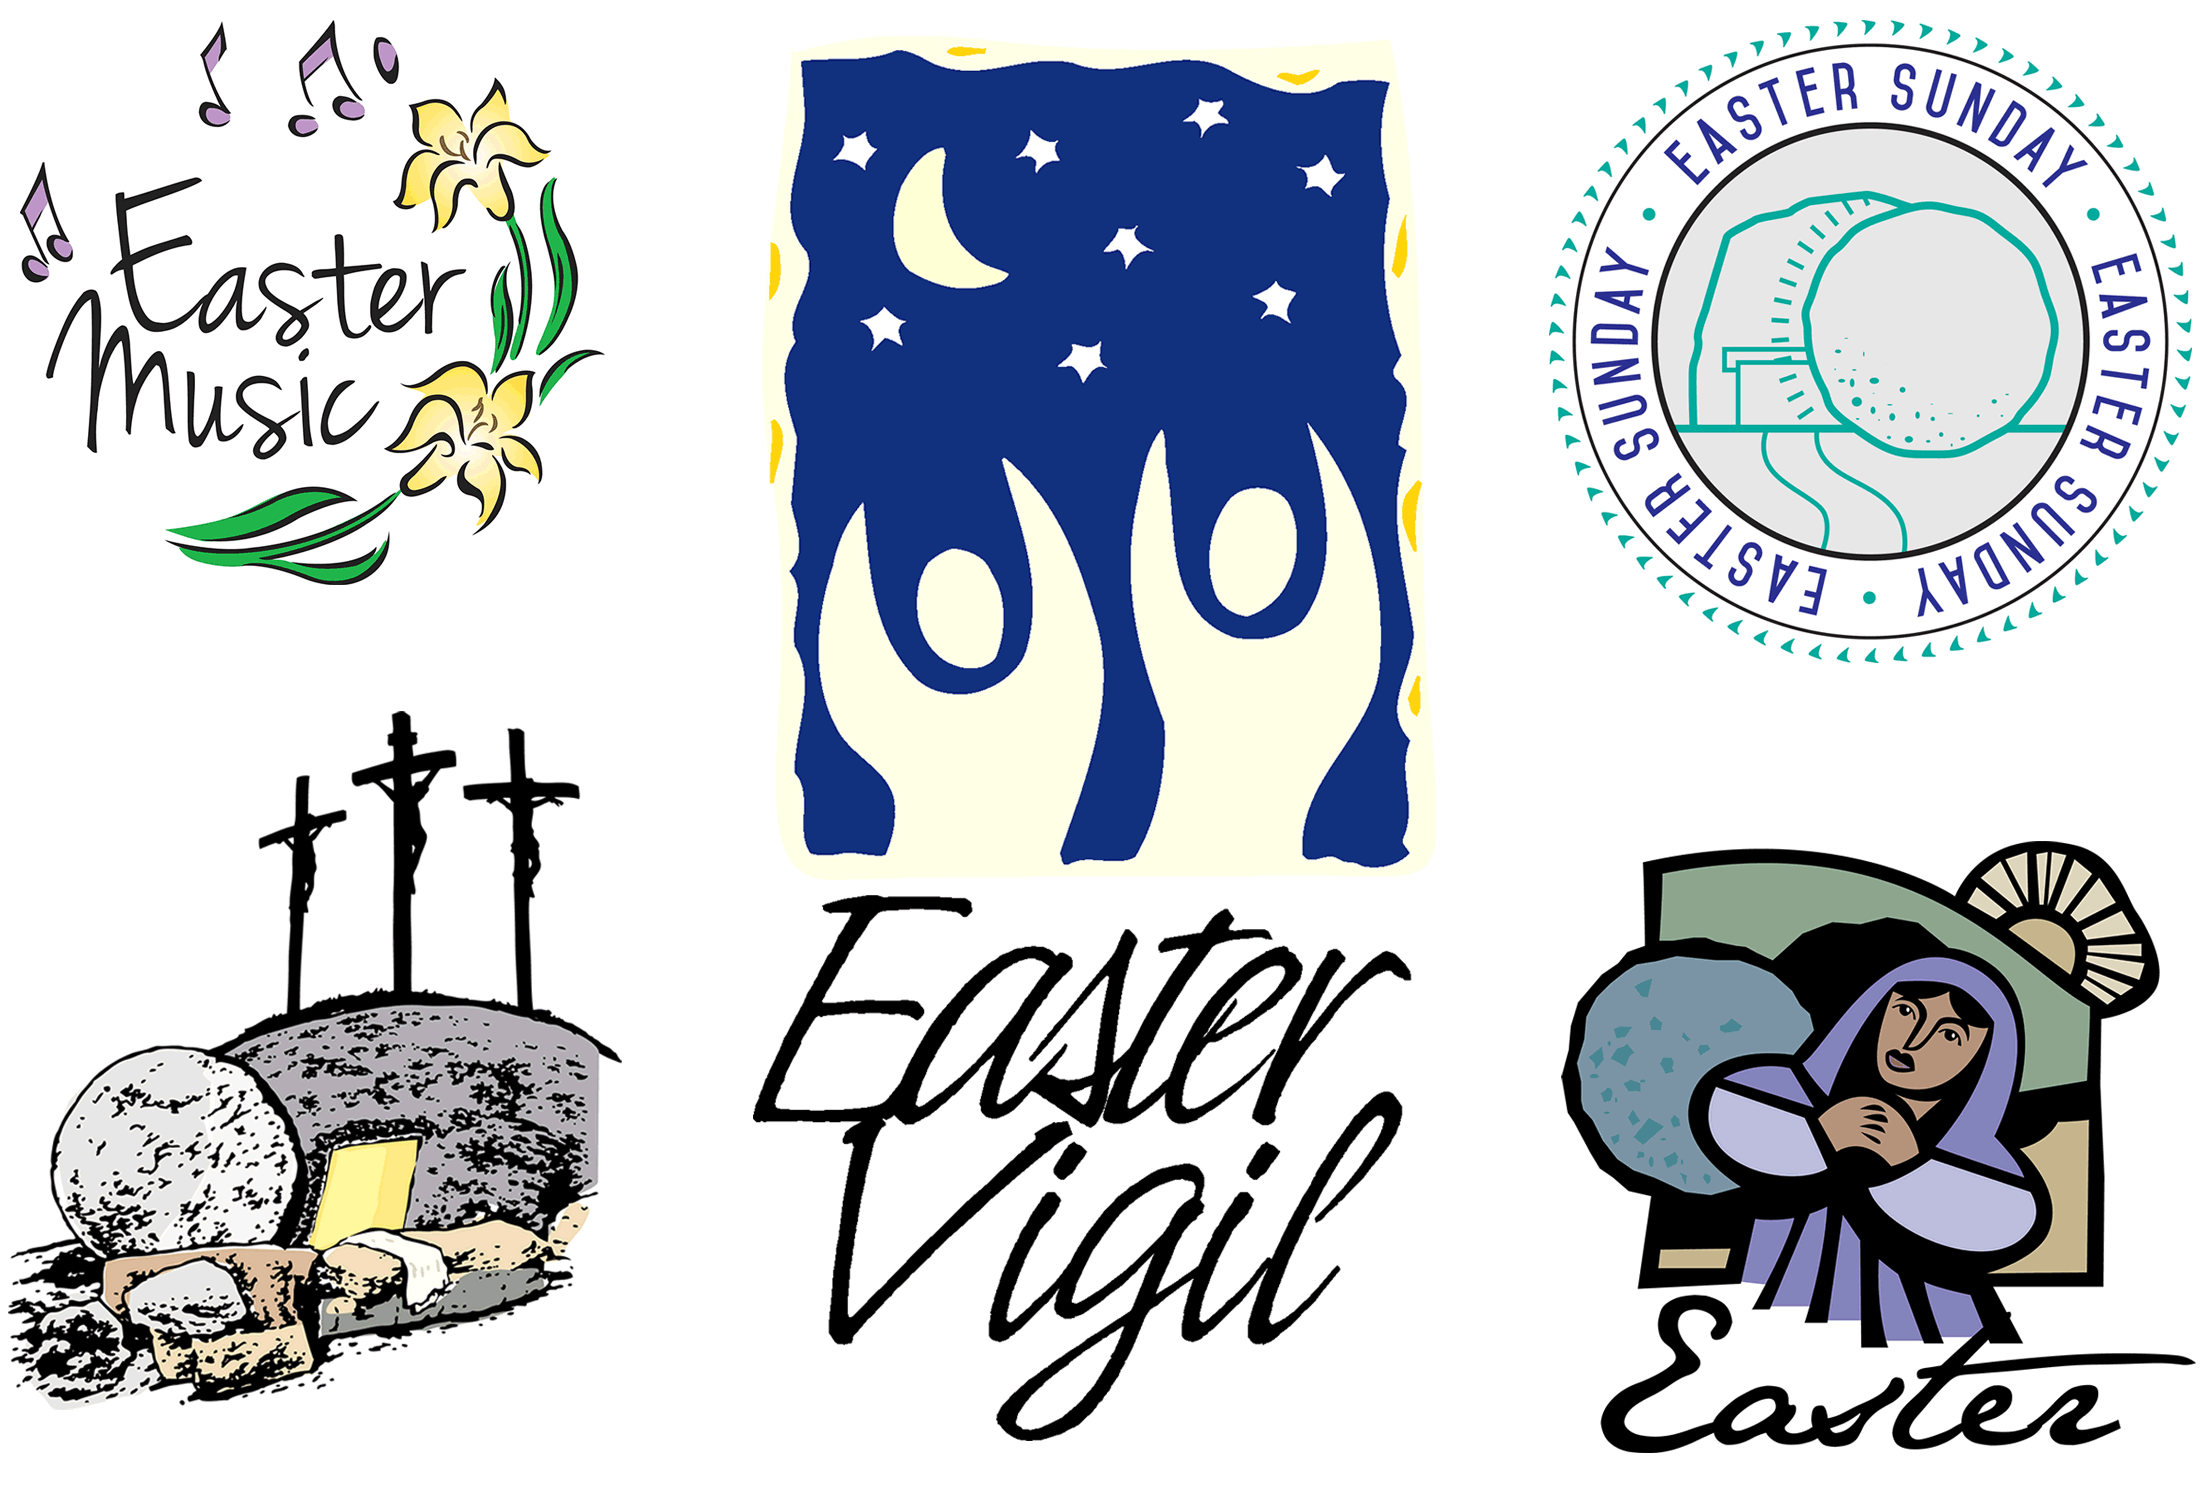 Easter Religious Clipart for Lent and Holy Week Service programs and announcements